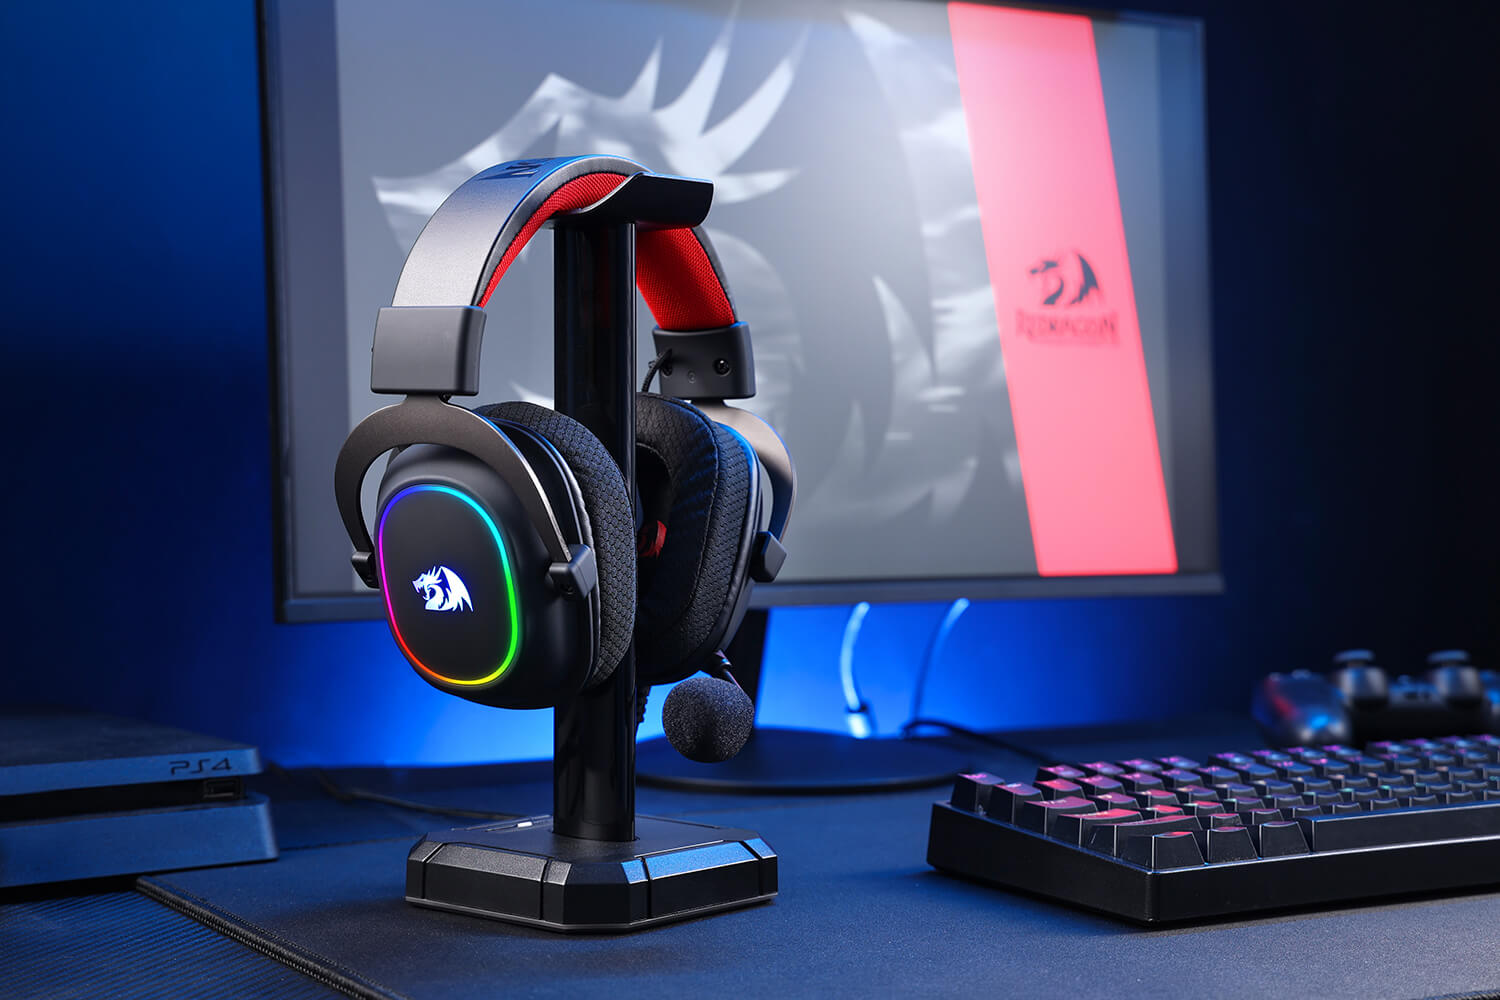 H510 Zeus-X RGB Wired Gaming Headset with 53MM Audio Drivers in Memory Foam Ear Pads w/Durable Fabric Cover